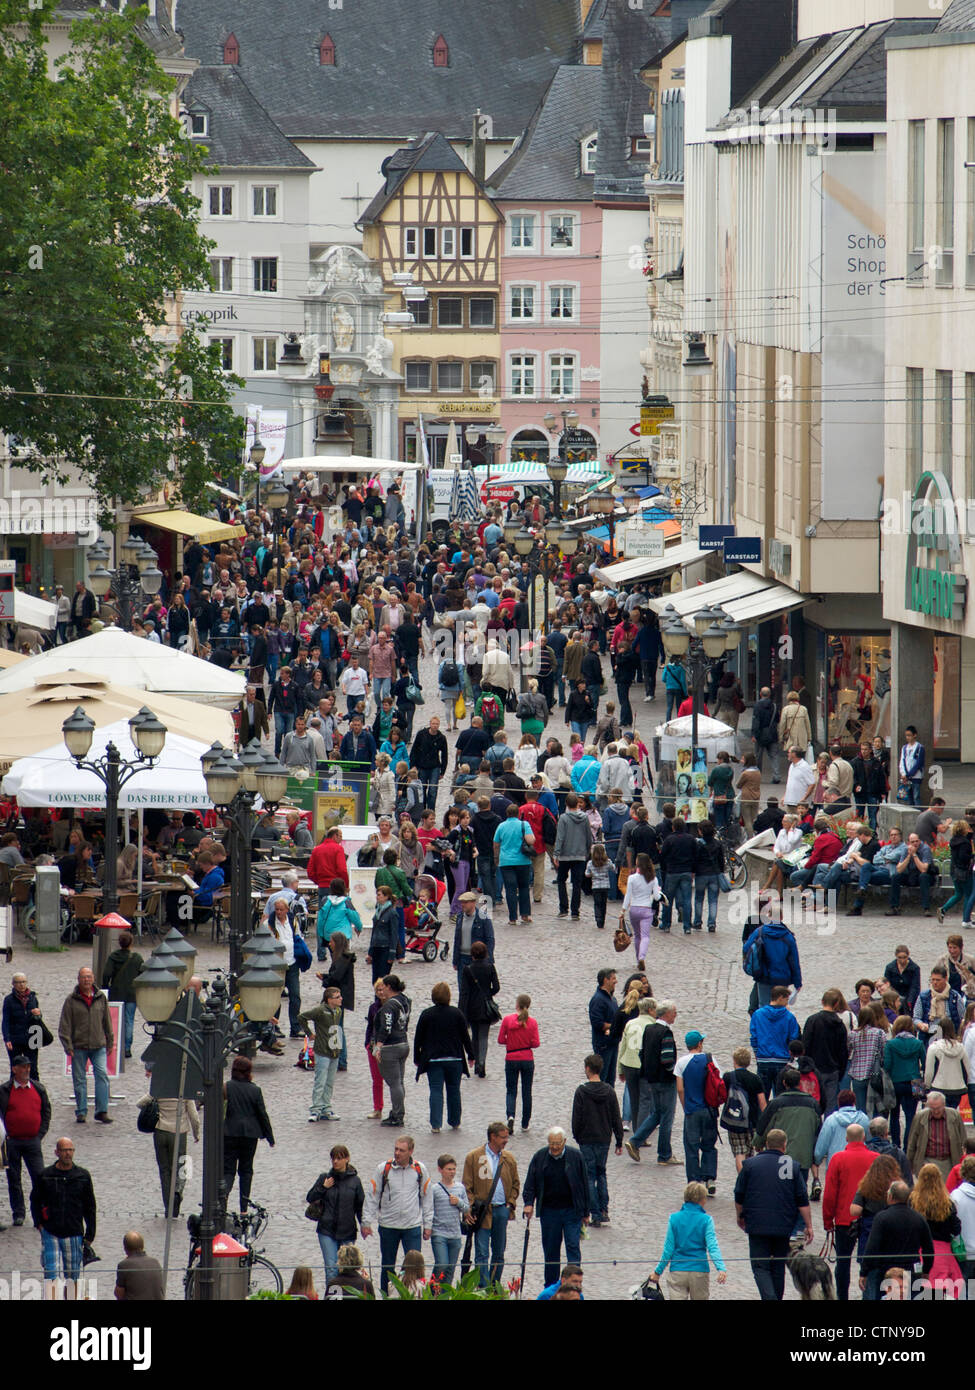 Busy street in the historic city center of Trier, Germany Stock Photo